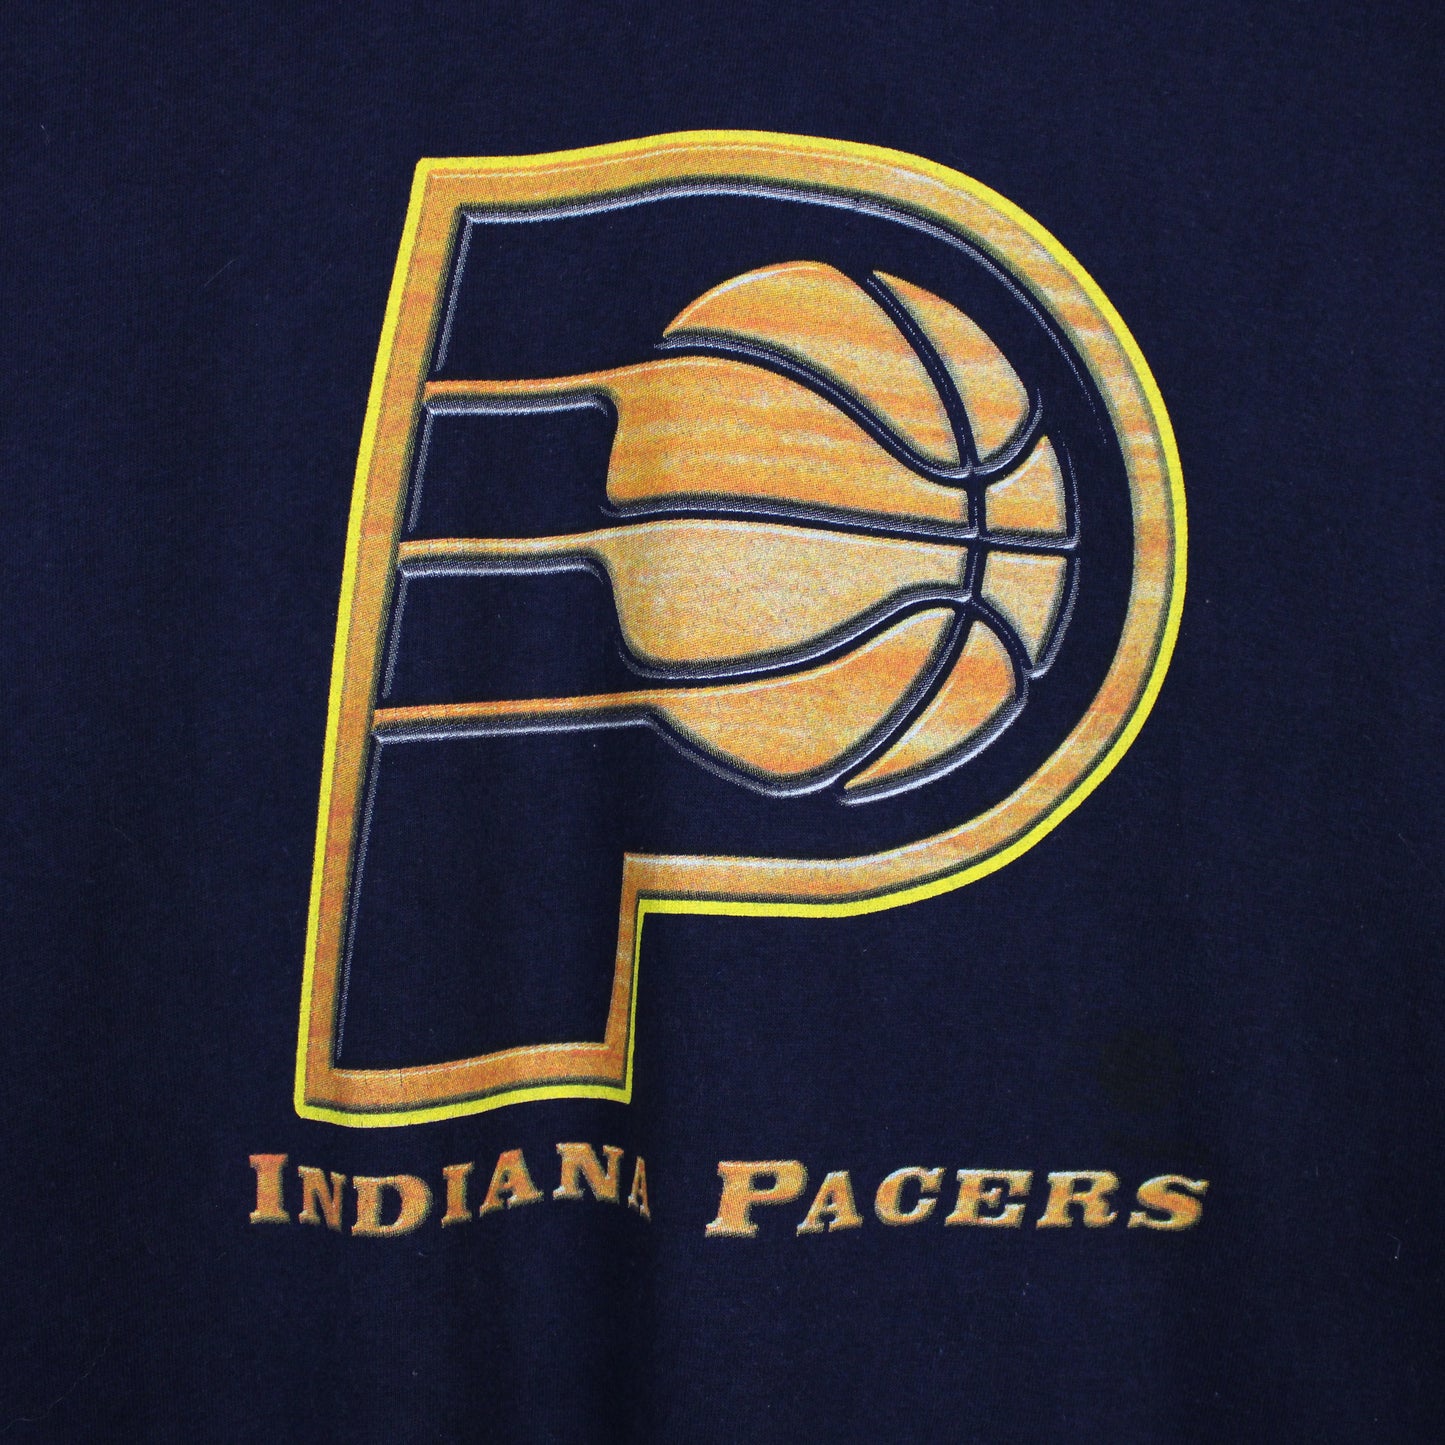 Vintage 90s Indiana Pacers NBA Tee - XL